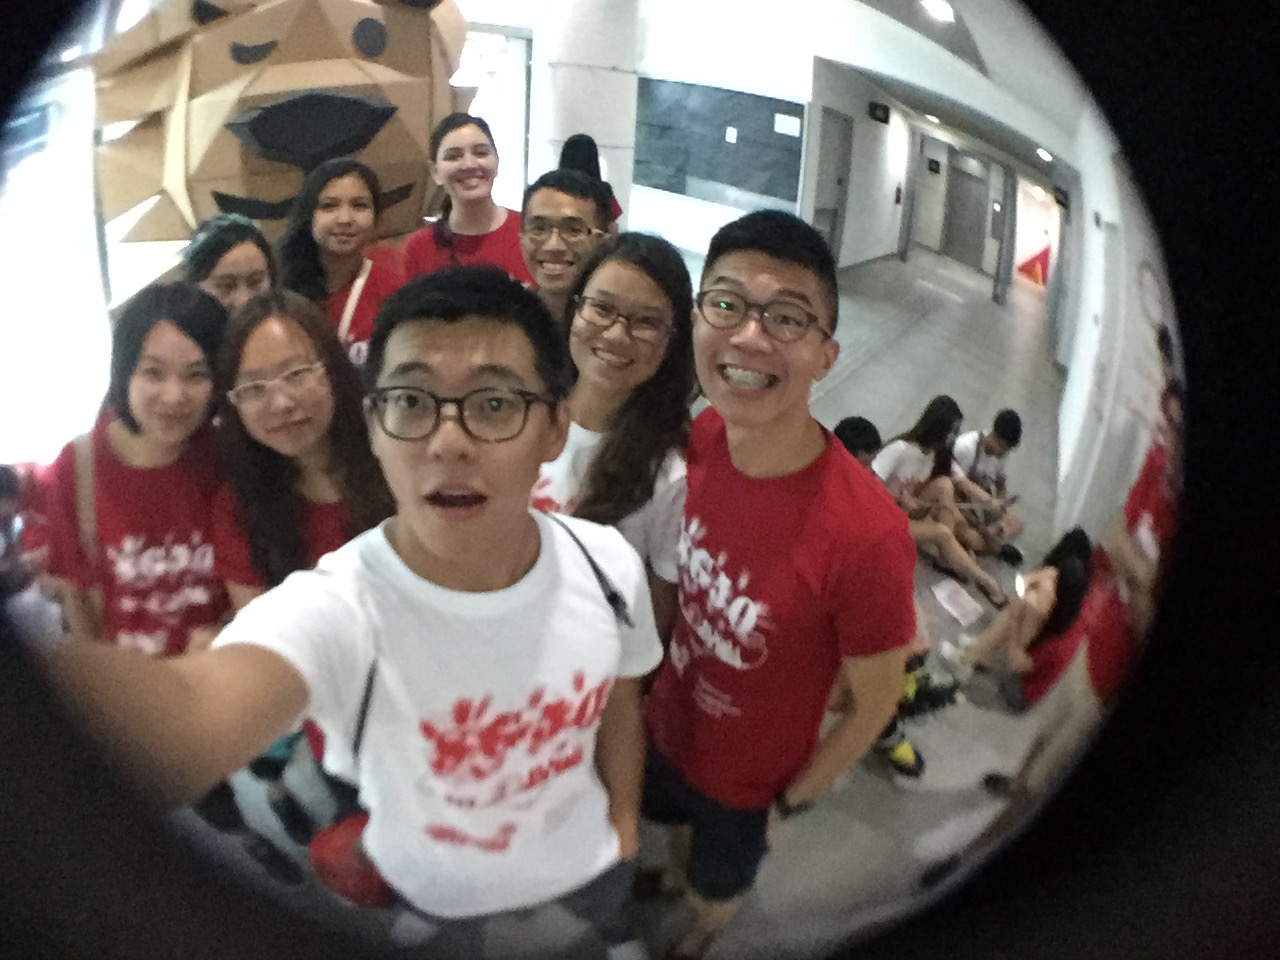 SMU SIS student Sean Koh with his team